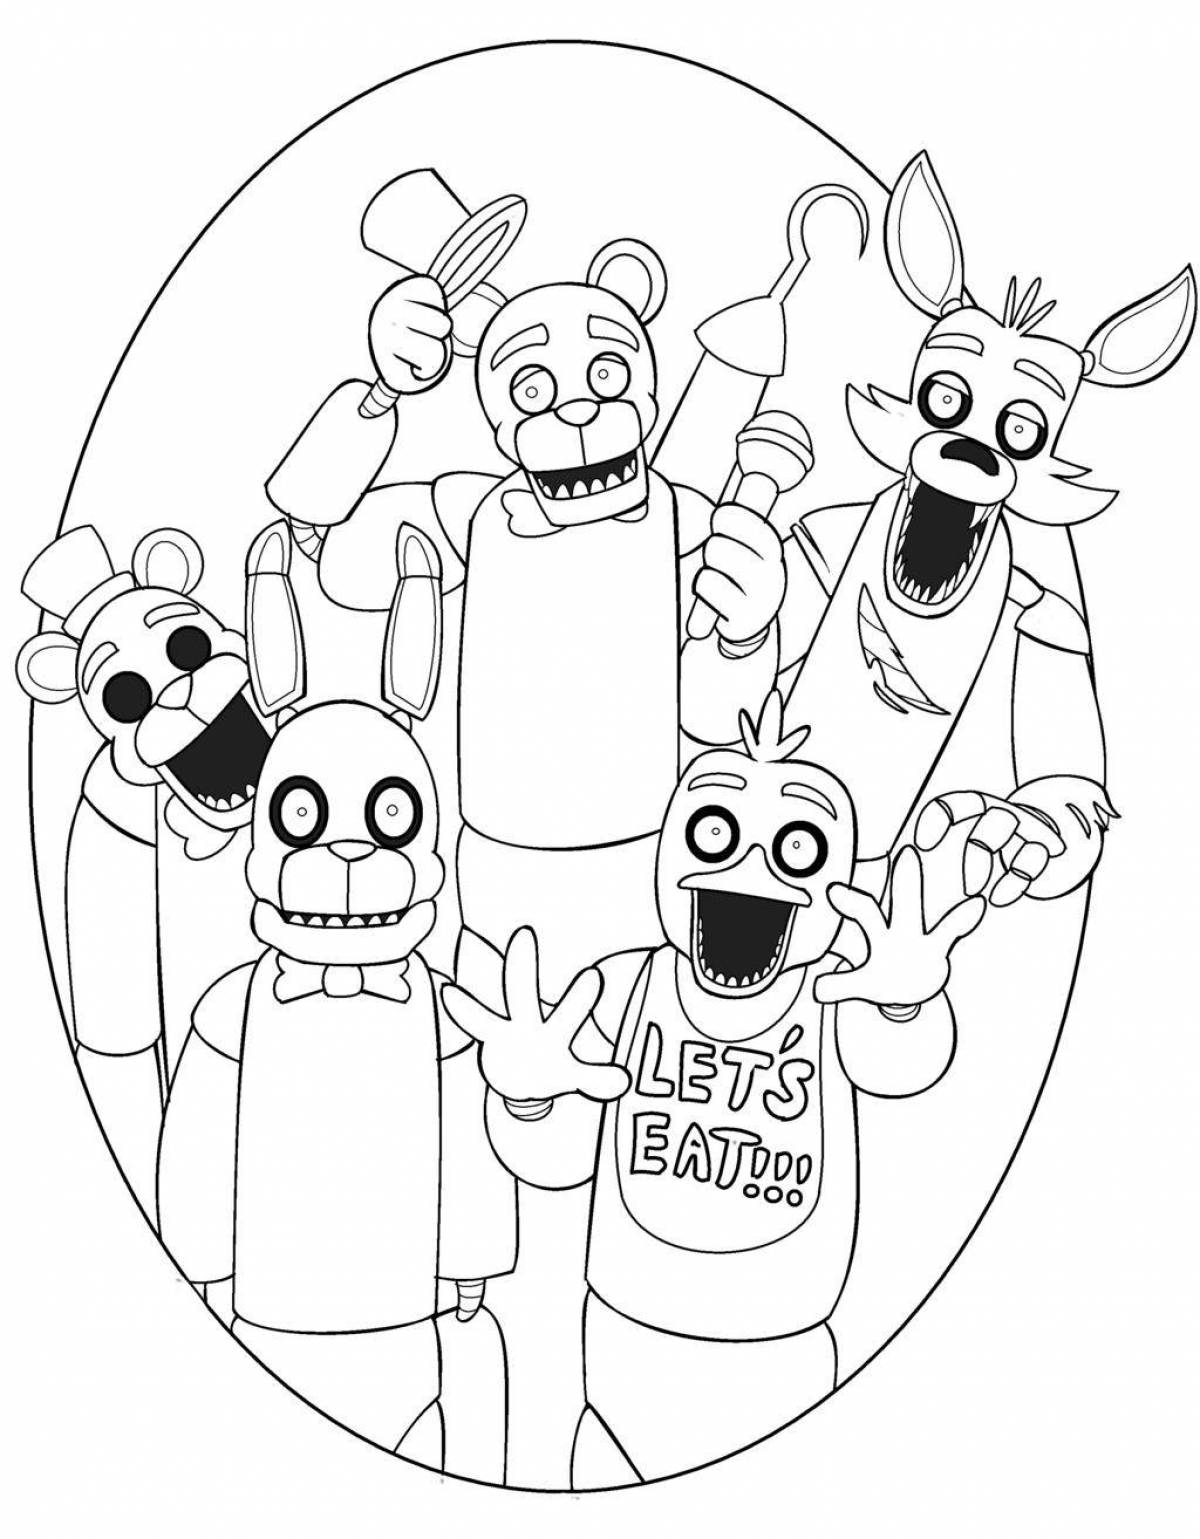 Colorful freddy robot coloring page